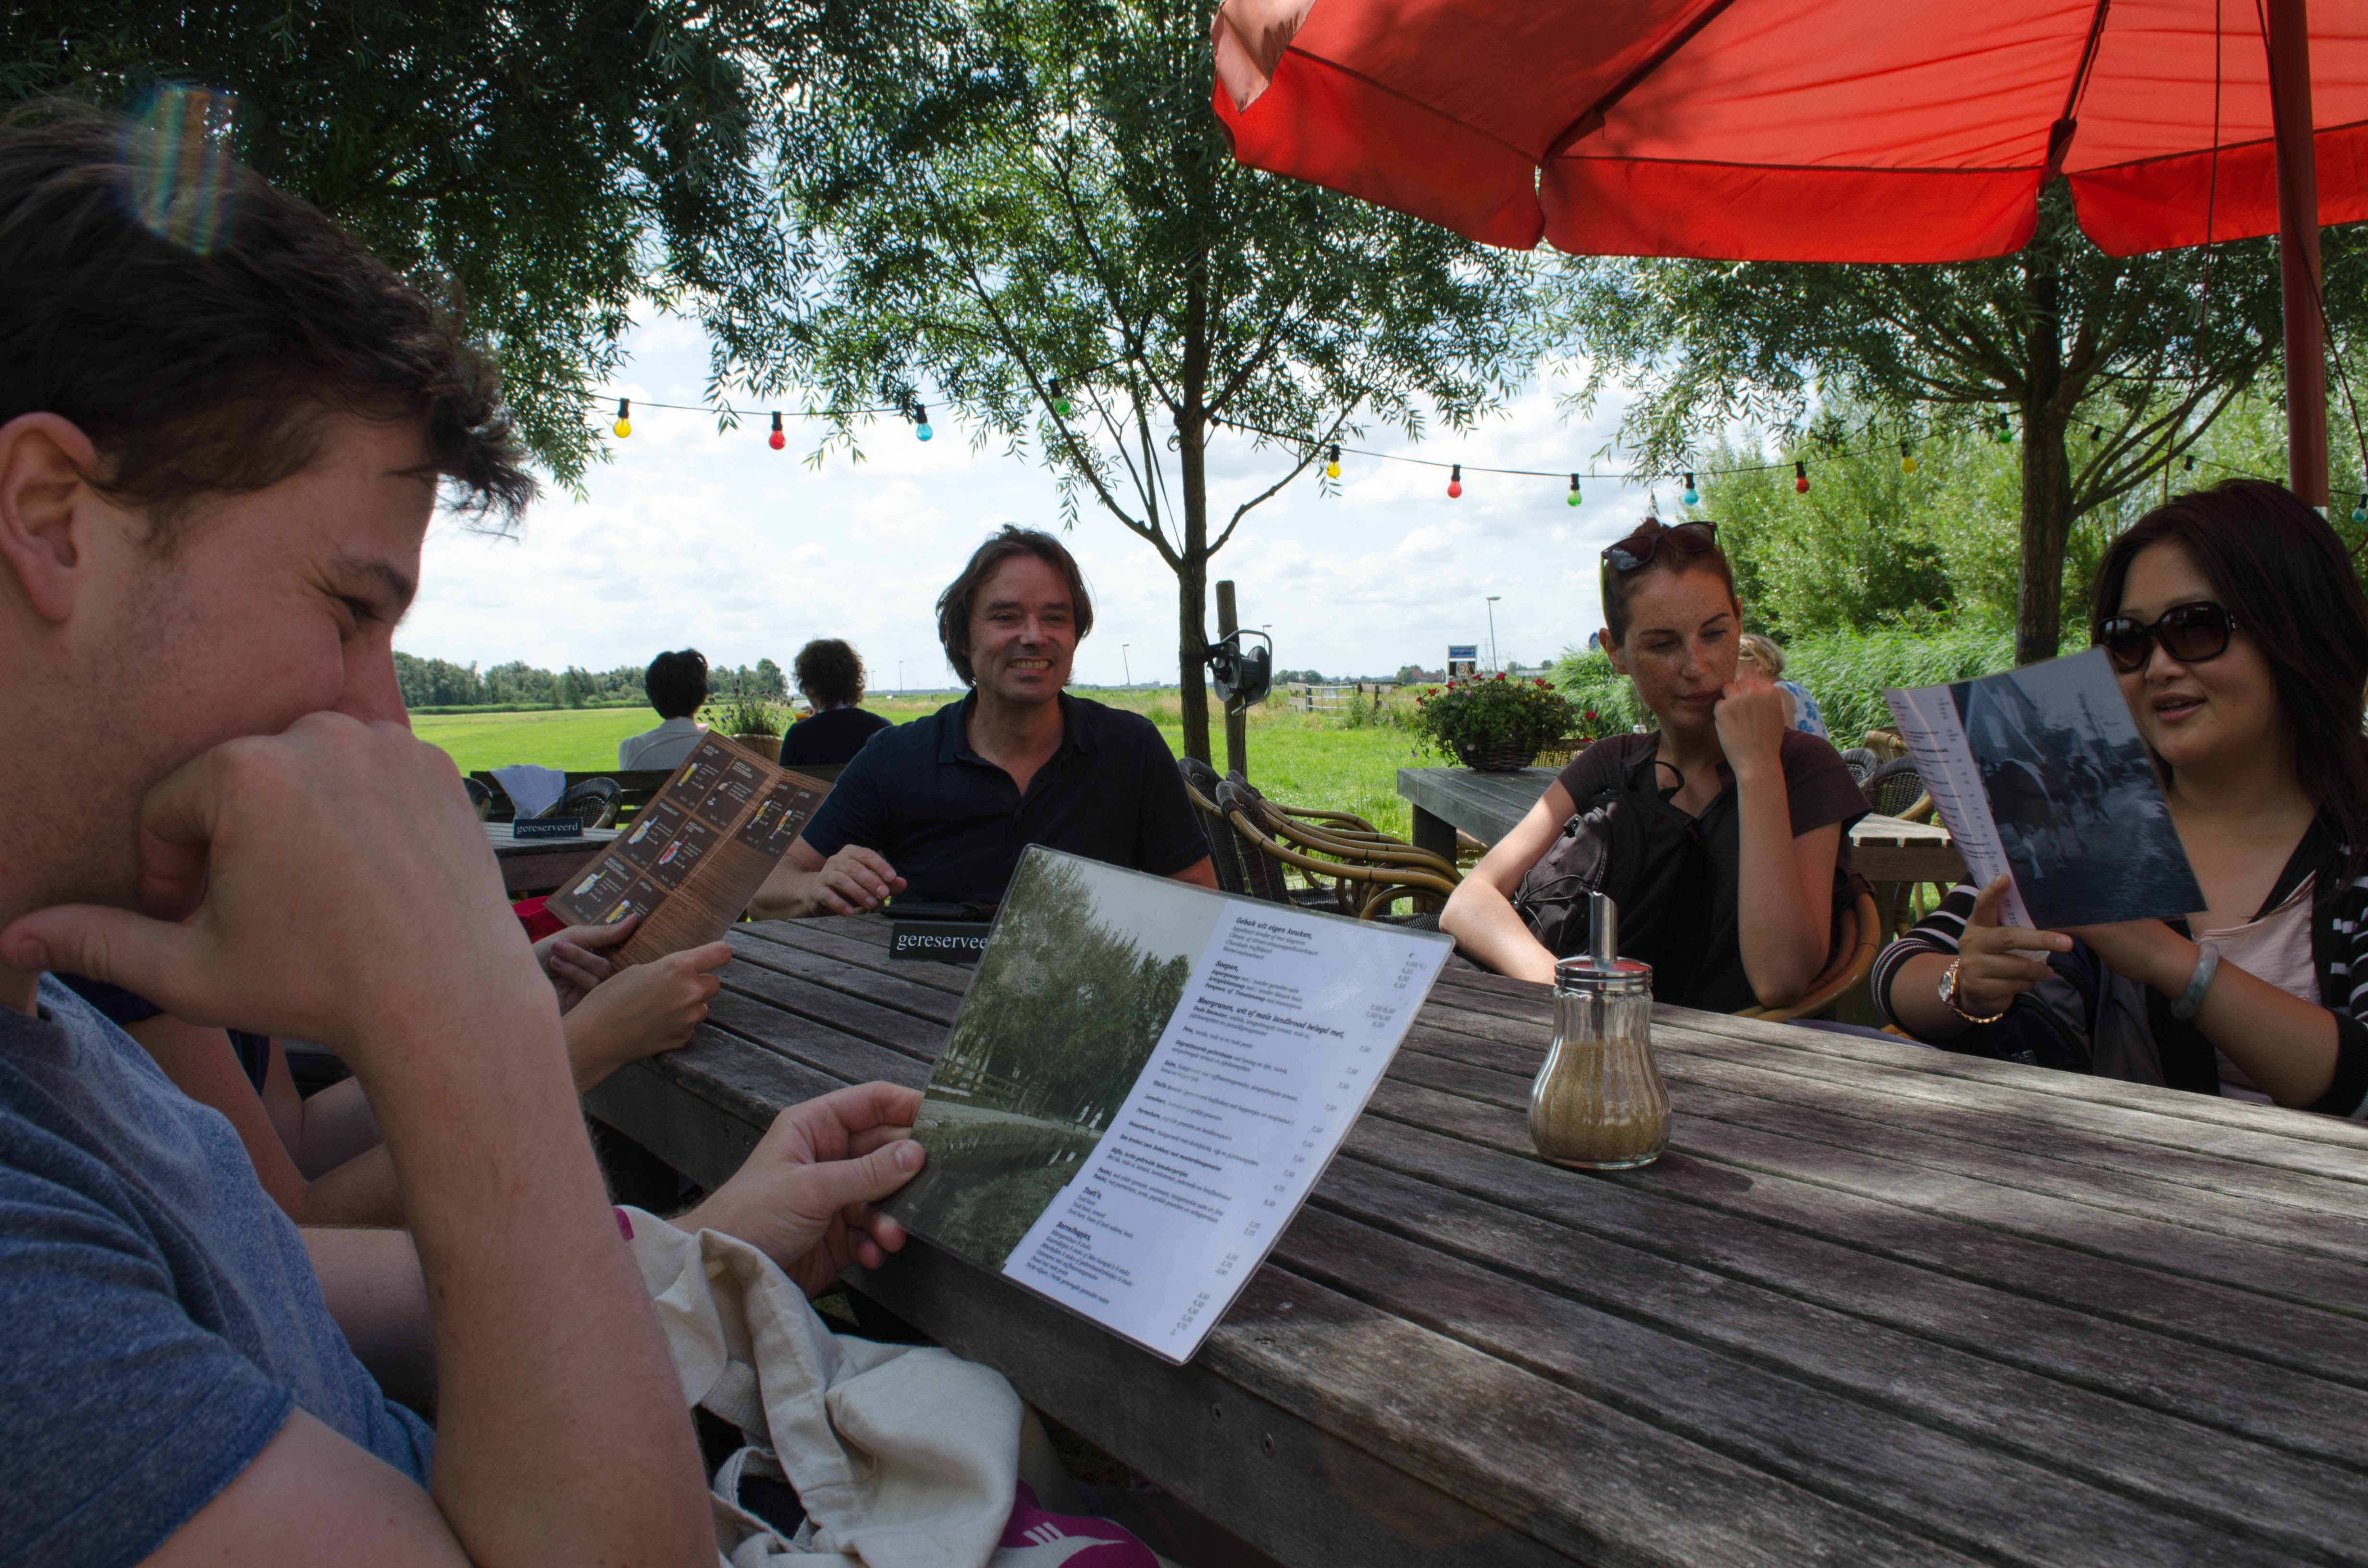 friends from Dutch class enjoy a meal at a brown cafe following a bike trip across the countryside of Holland, just outside Amsterdam-Noord